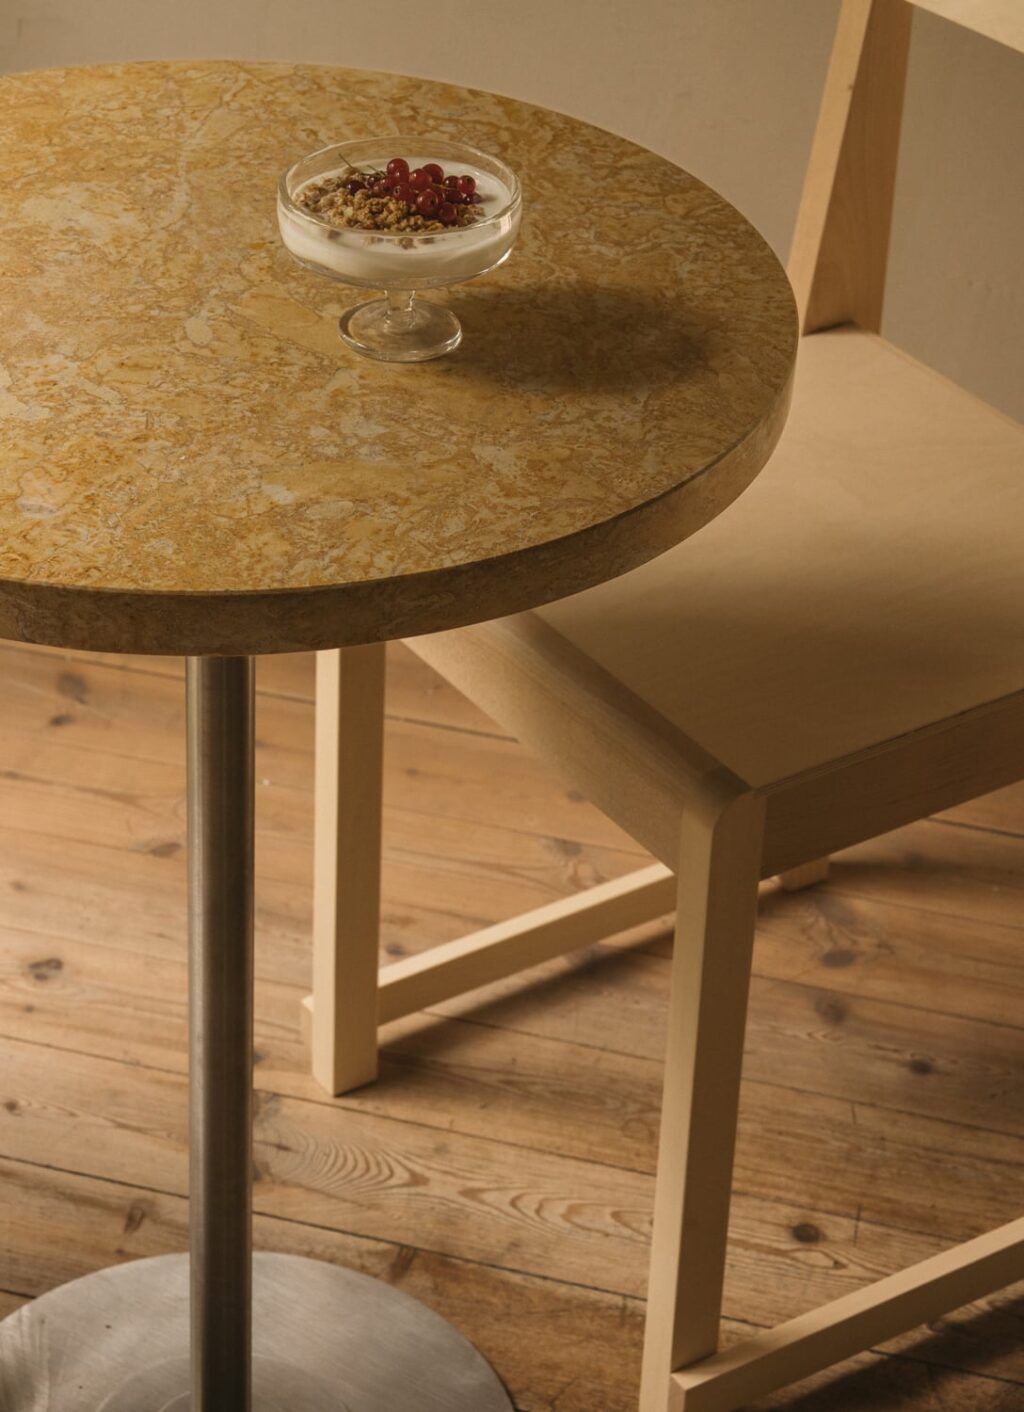 Frama - Table 57 - Yellow Limestone - Stainless Steel - 55cm